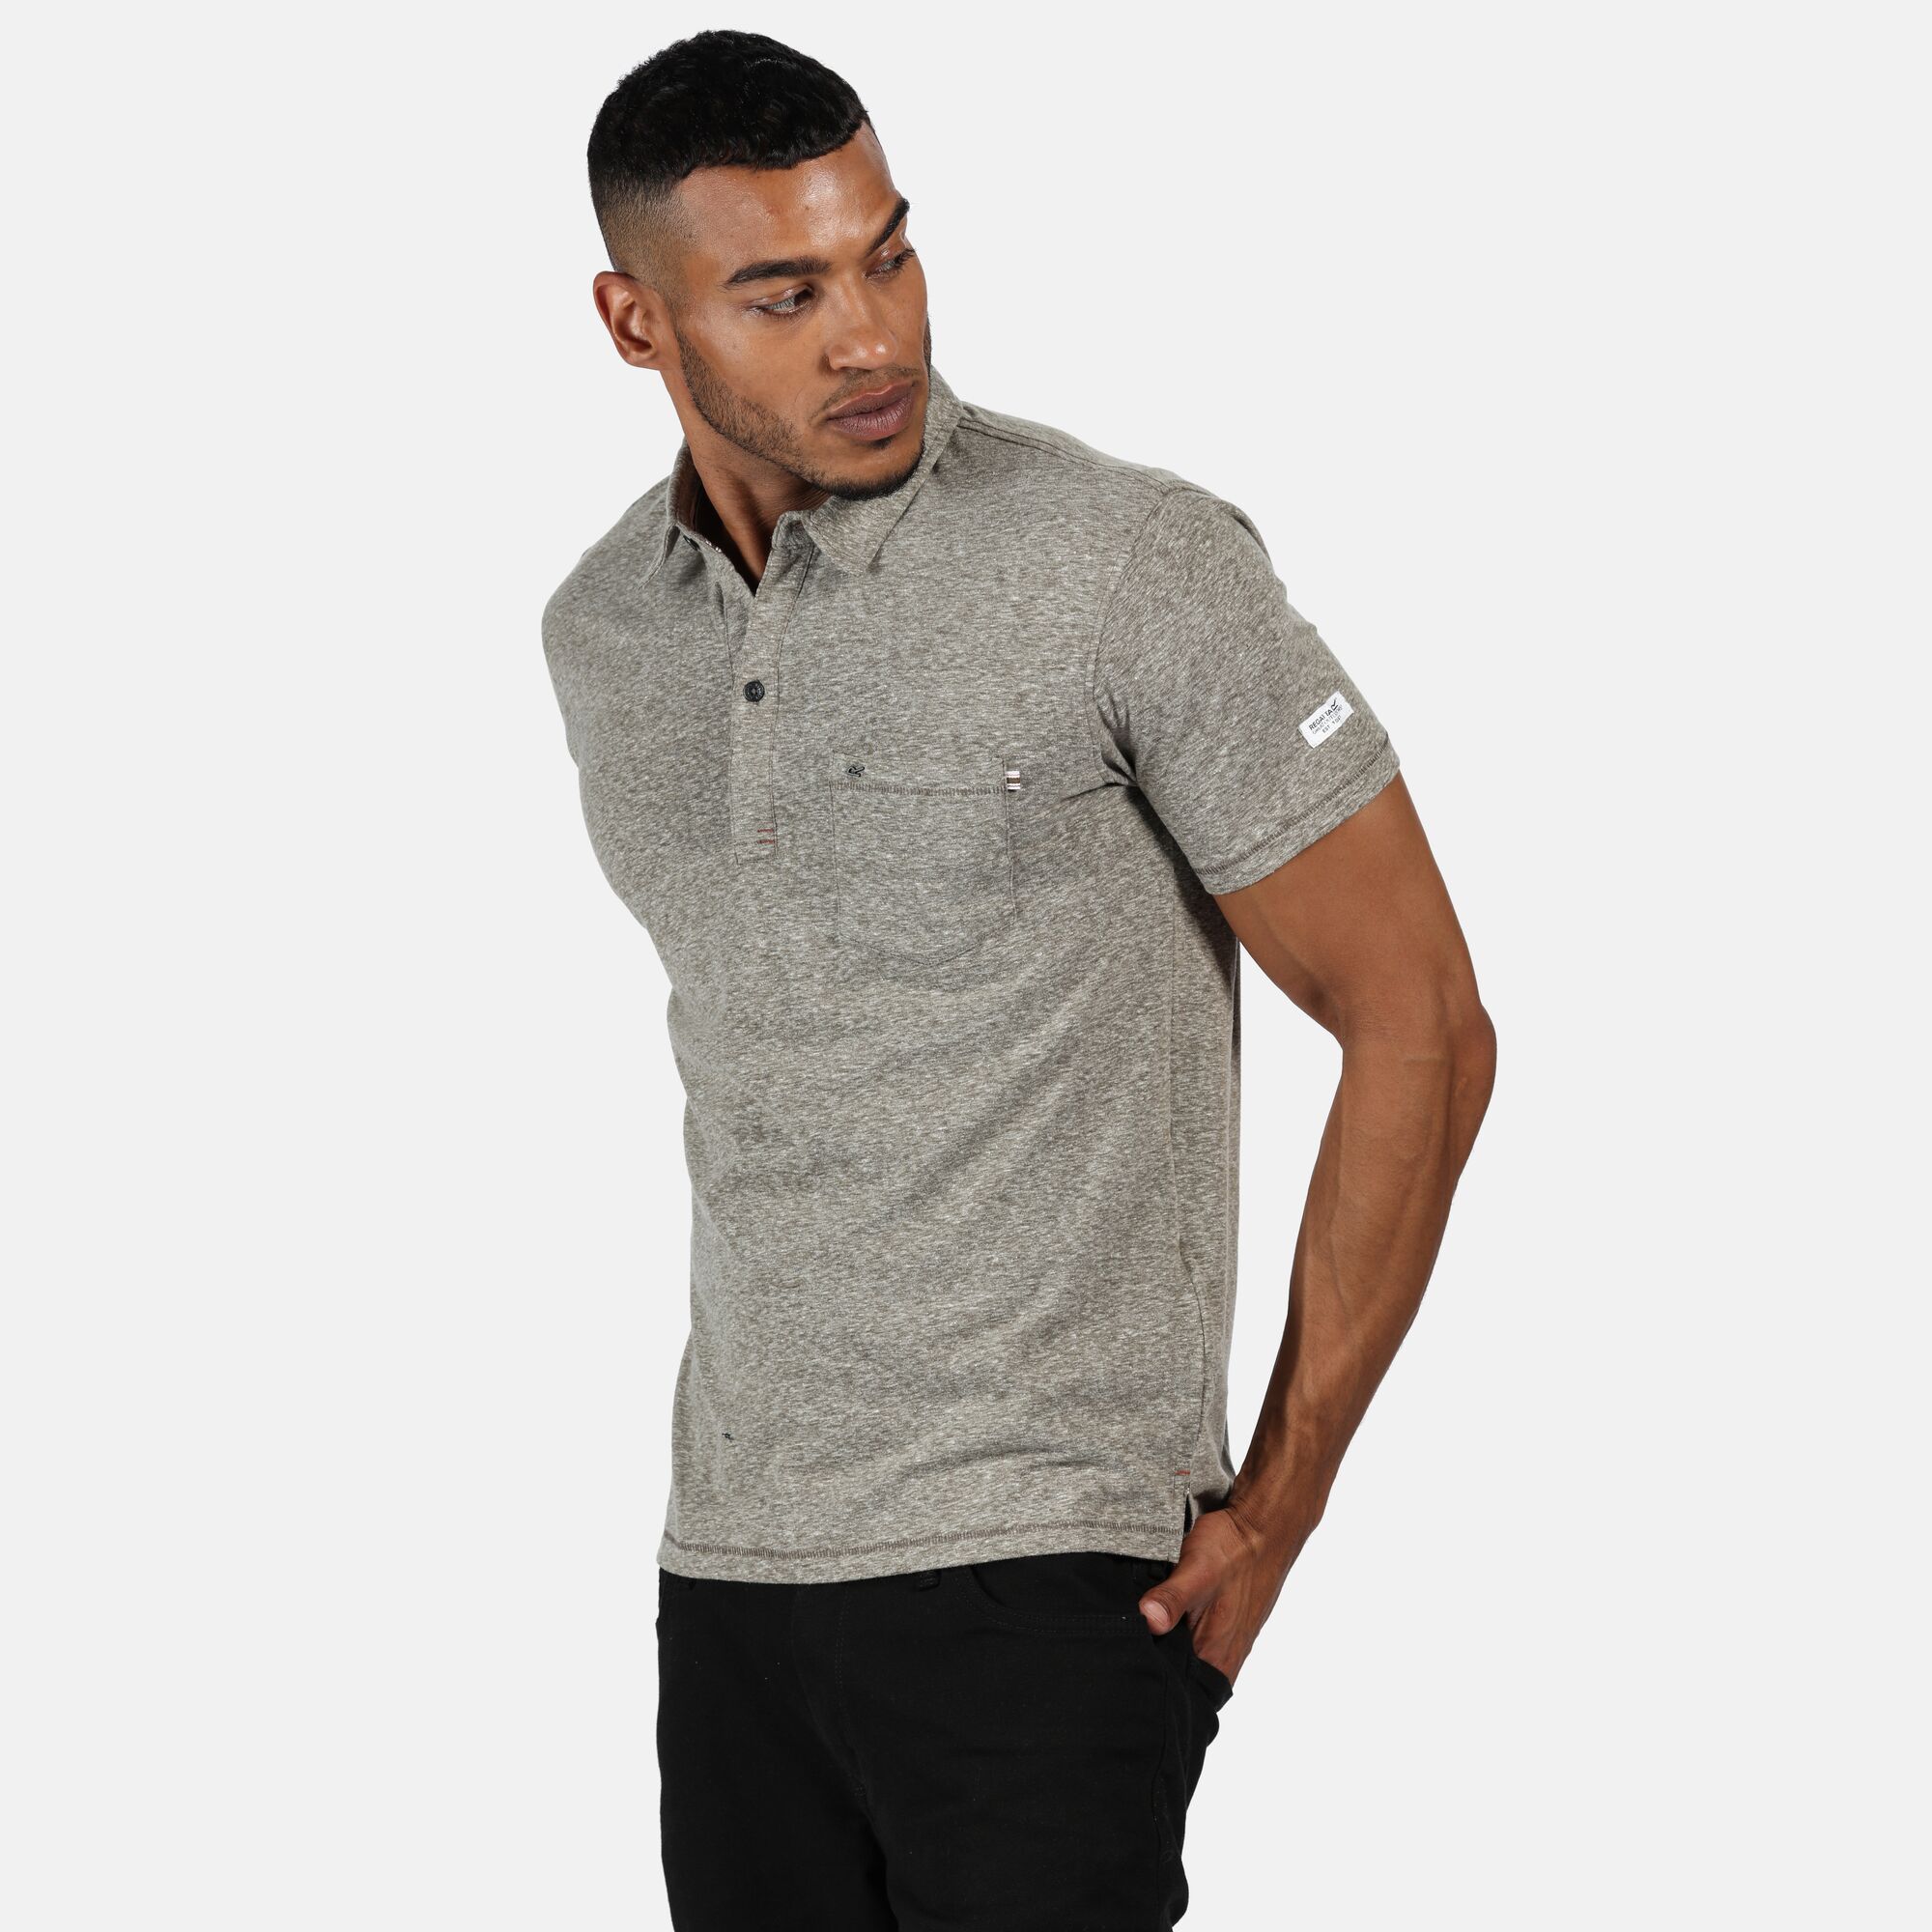 Material: 100% Cotton. 180gsm coolweave material breathable short-sleeved polo shirt. Two-button placket with dyed to match branded buttons. 1 patch pocket on the chest.